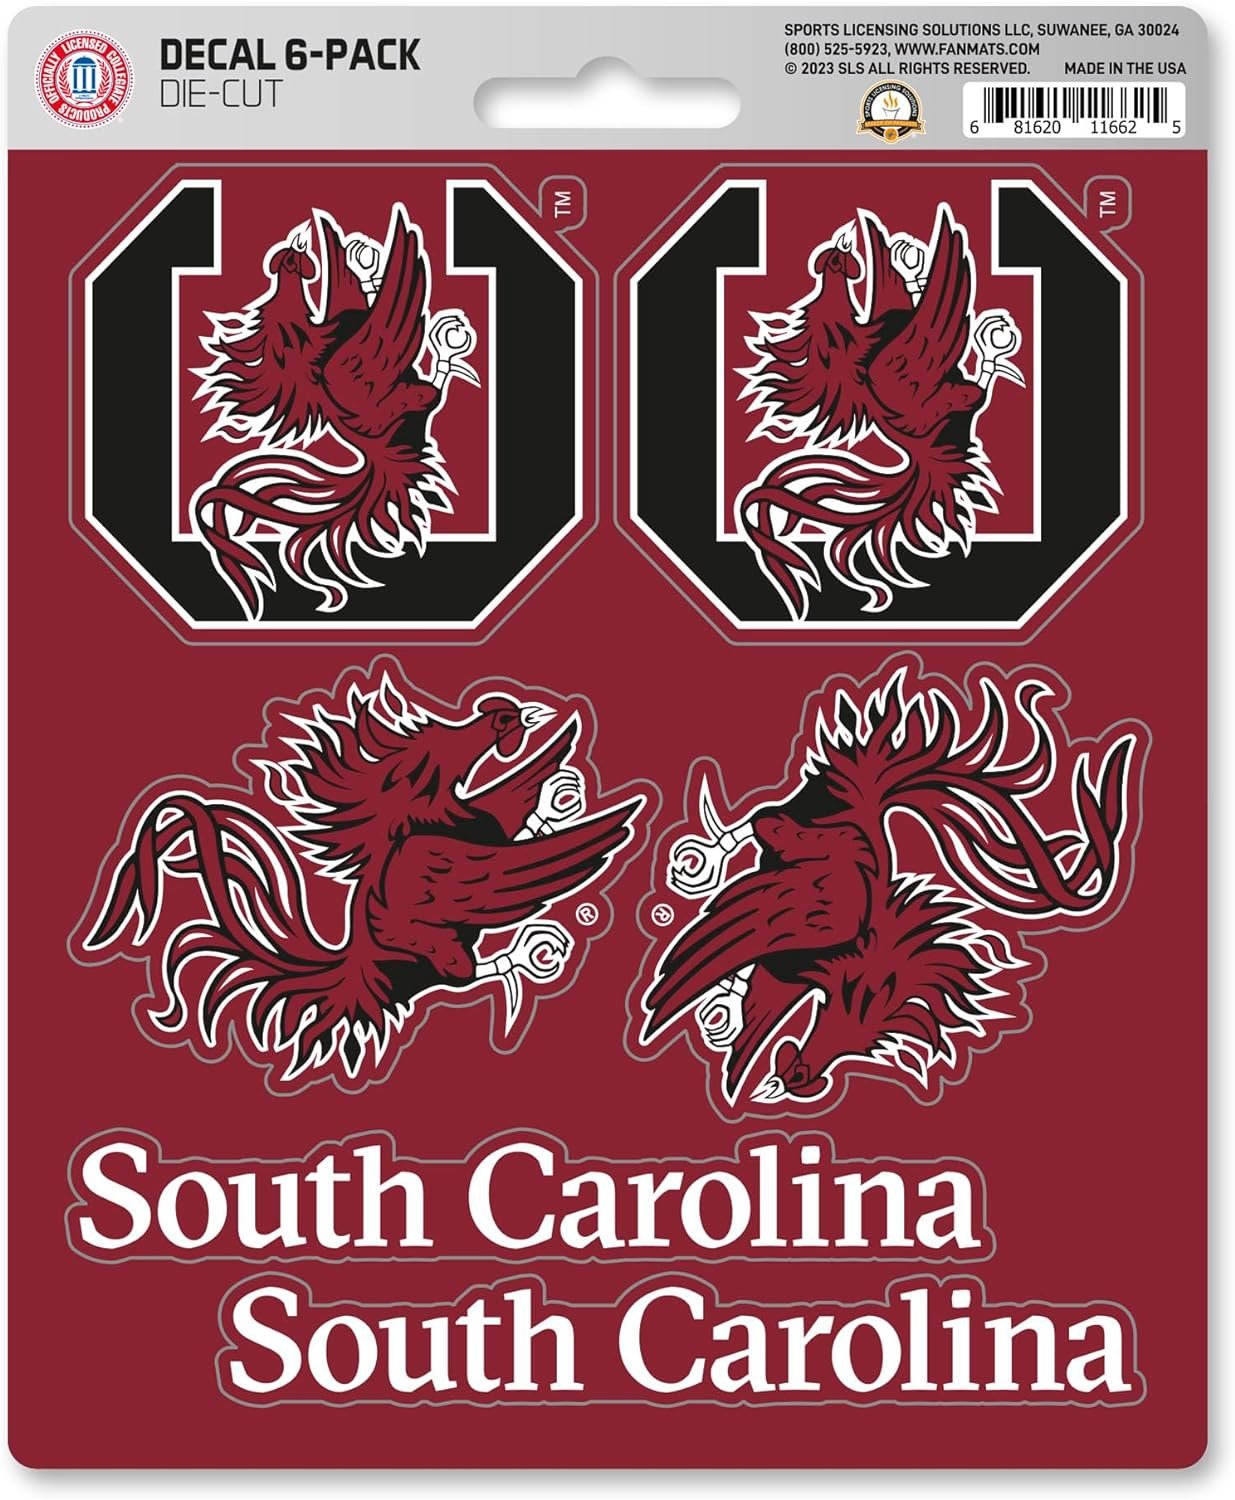 University of South Carolina Gamecocks 6-Piece Decal Sticker Set, 5x6 Inch Sheet, Gift for football fans for any hard surfaces around home, automotive, personal items